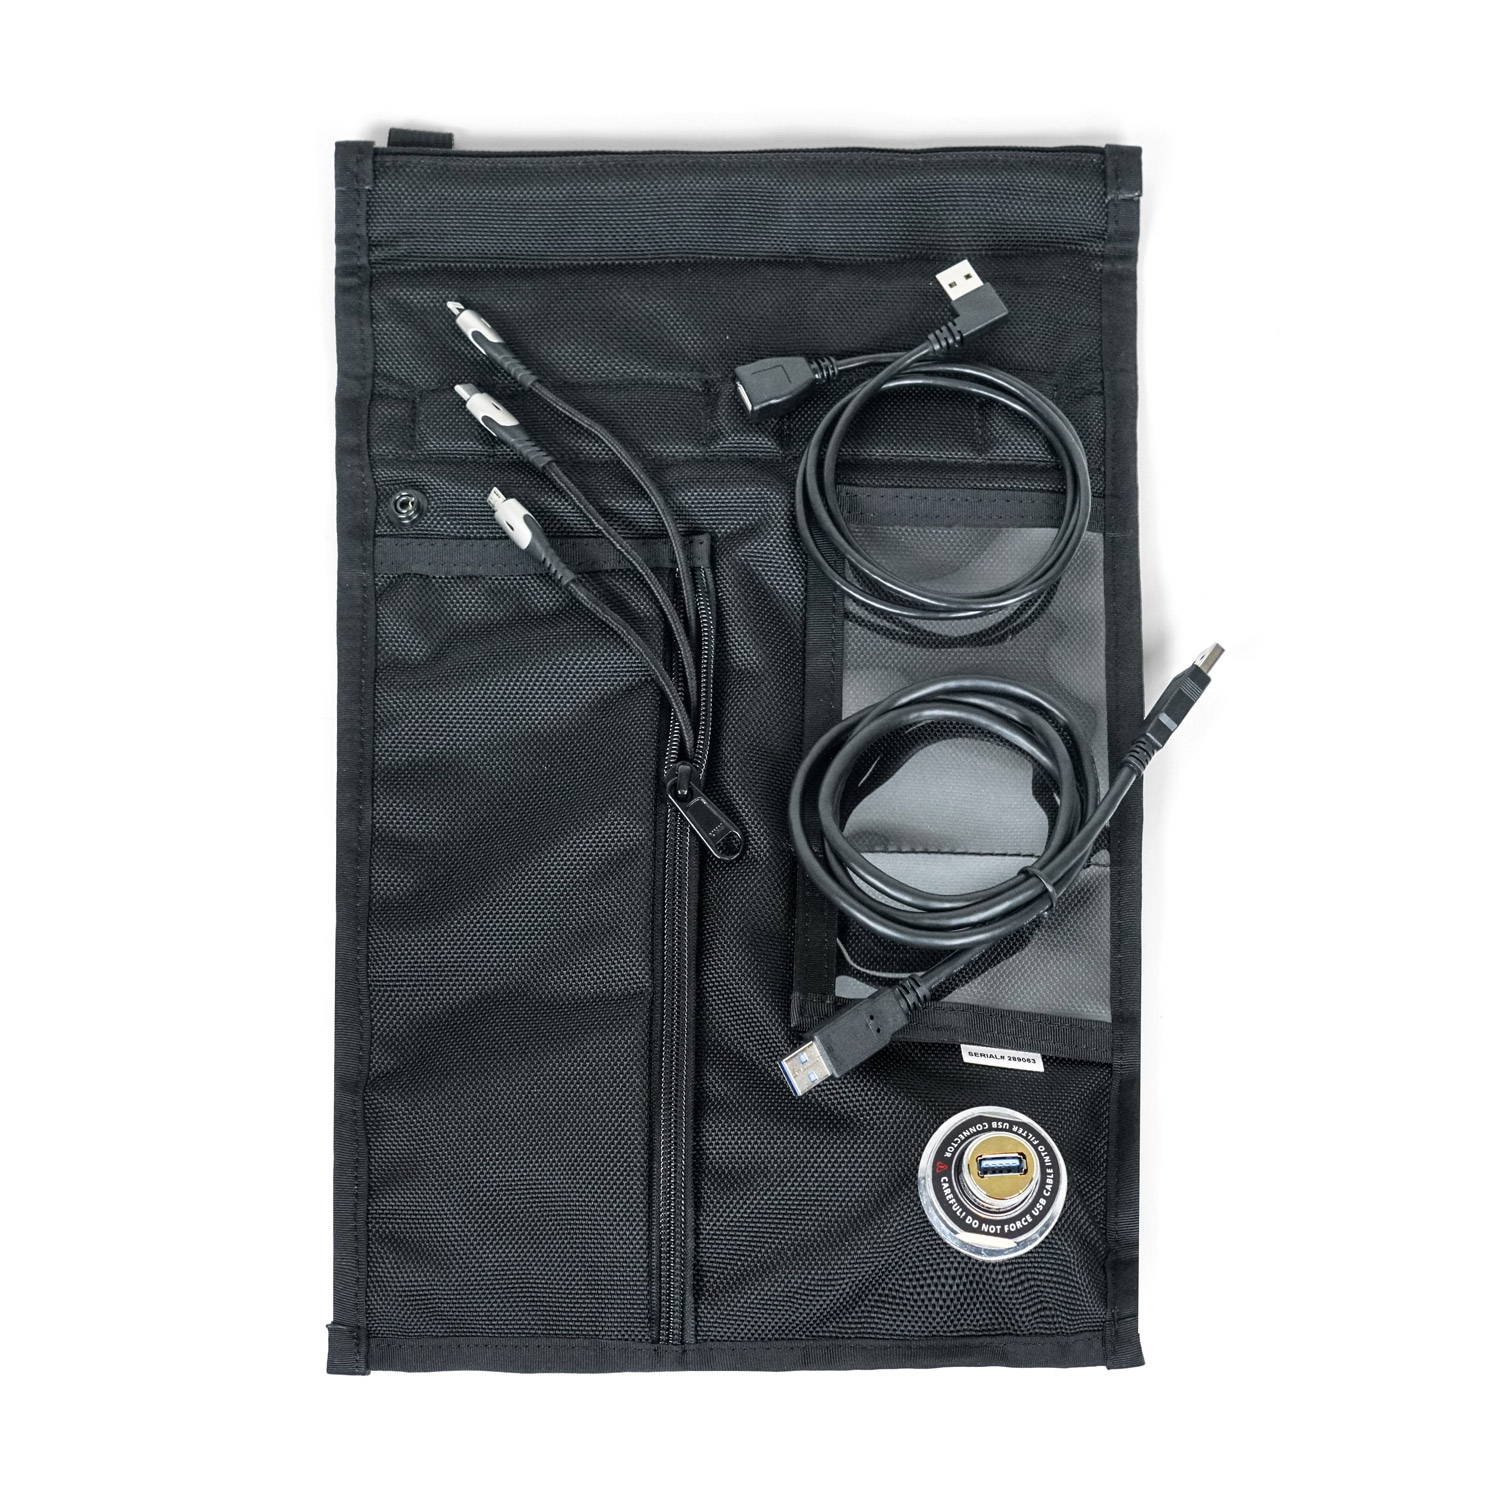 charge and shield faraday bag includes cell phone cable tips to connect to power source prevents lockout mode